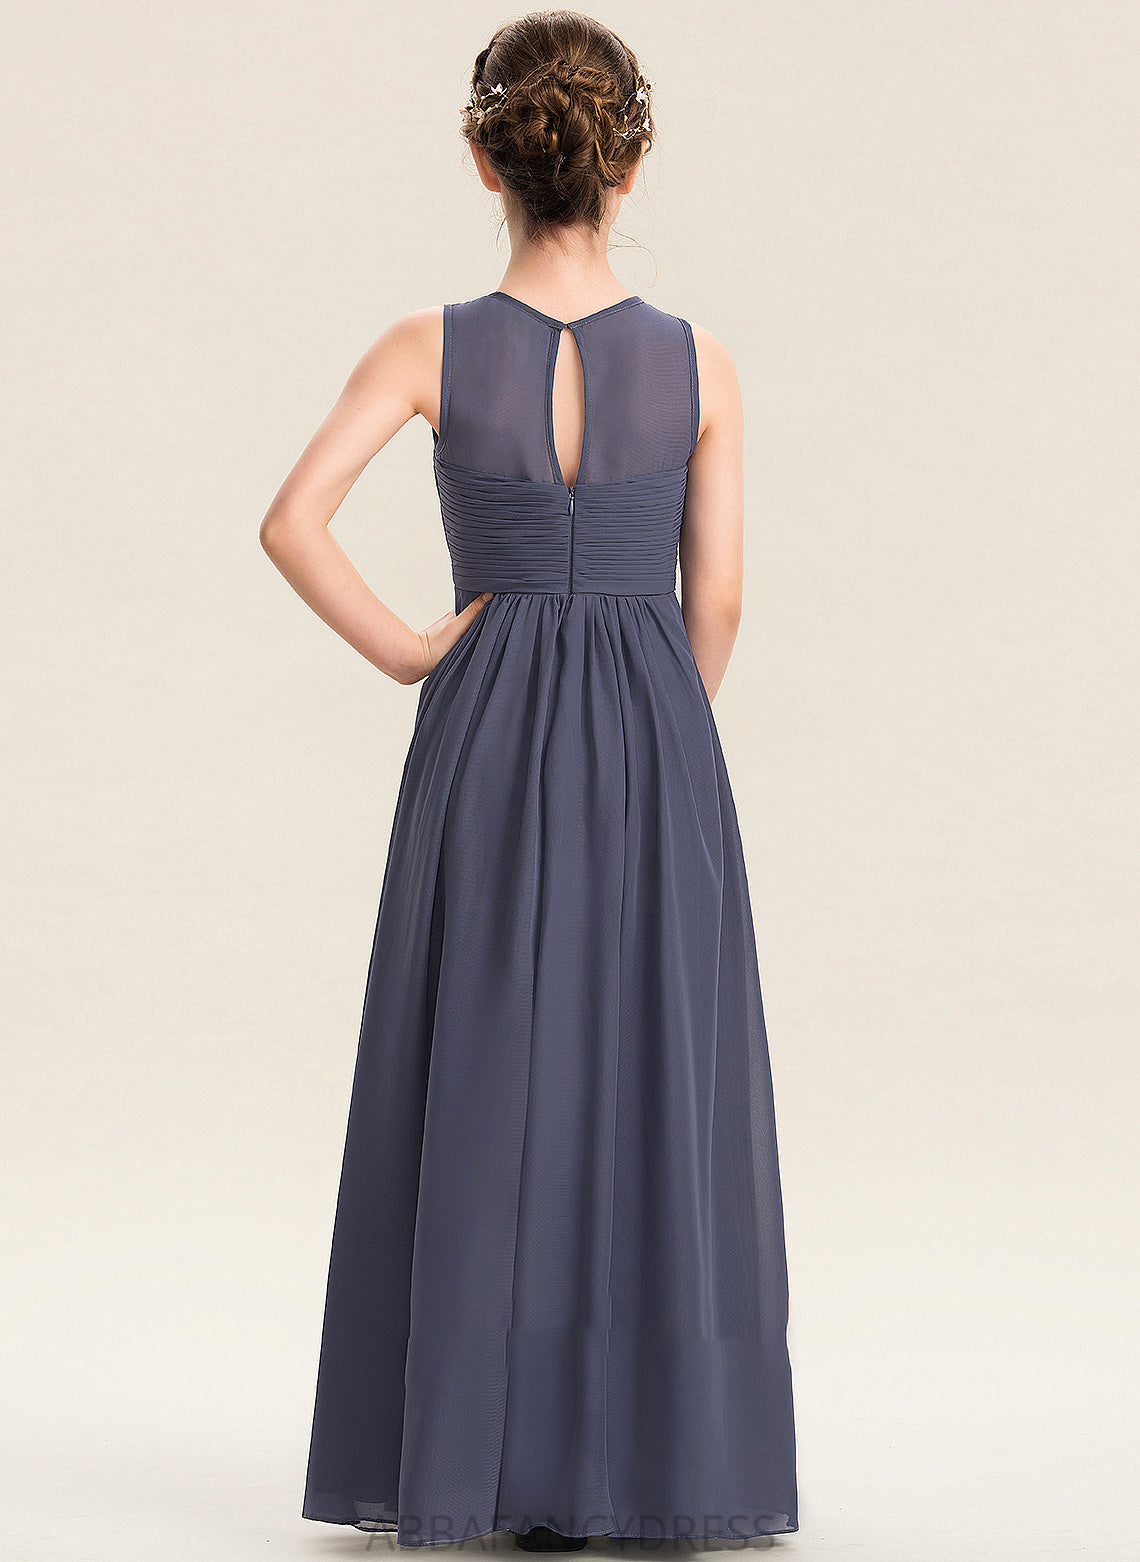 With Chiffon A-Line Junior Bridesmaid Dresses Lesly Floor-Length Scoop Ruffle Neck